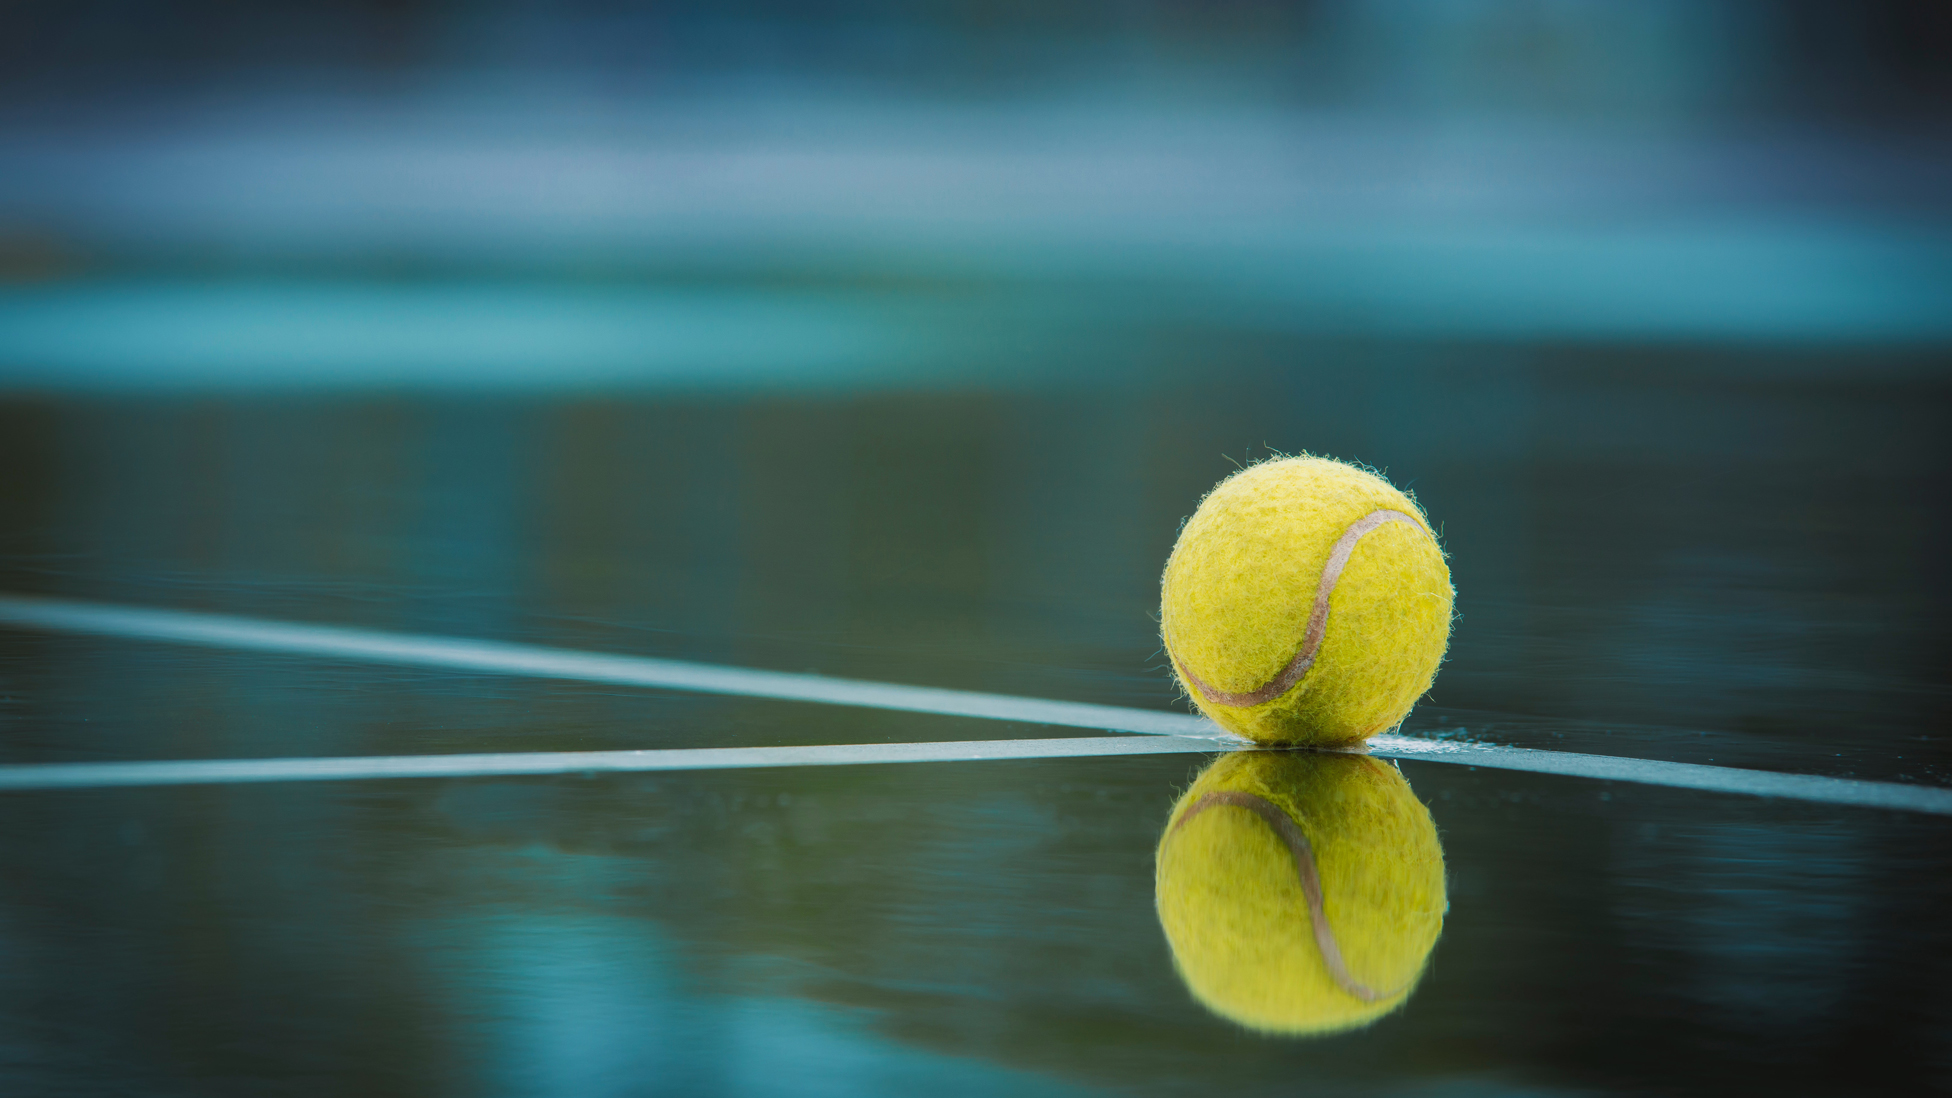 No Strings Attached: City of Coral Springs Offers Summer Tennis Classes